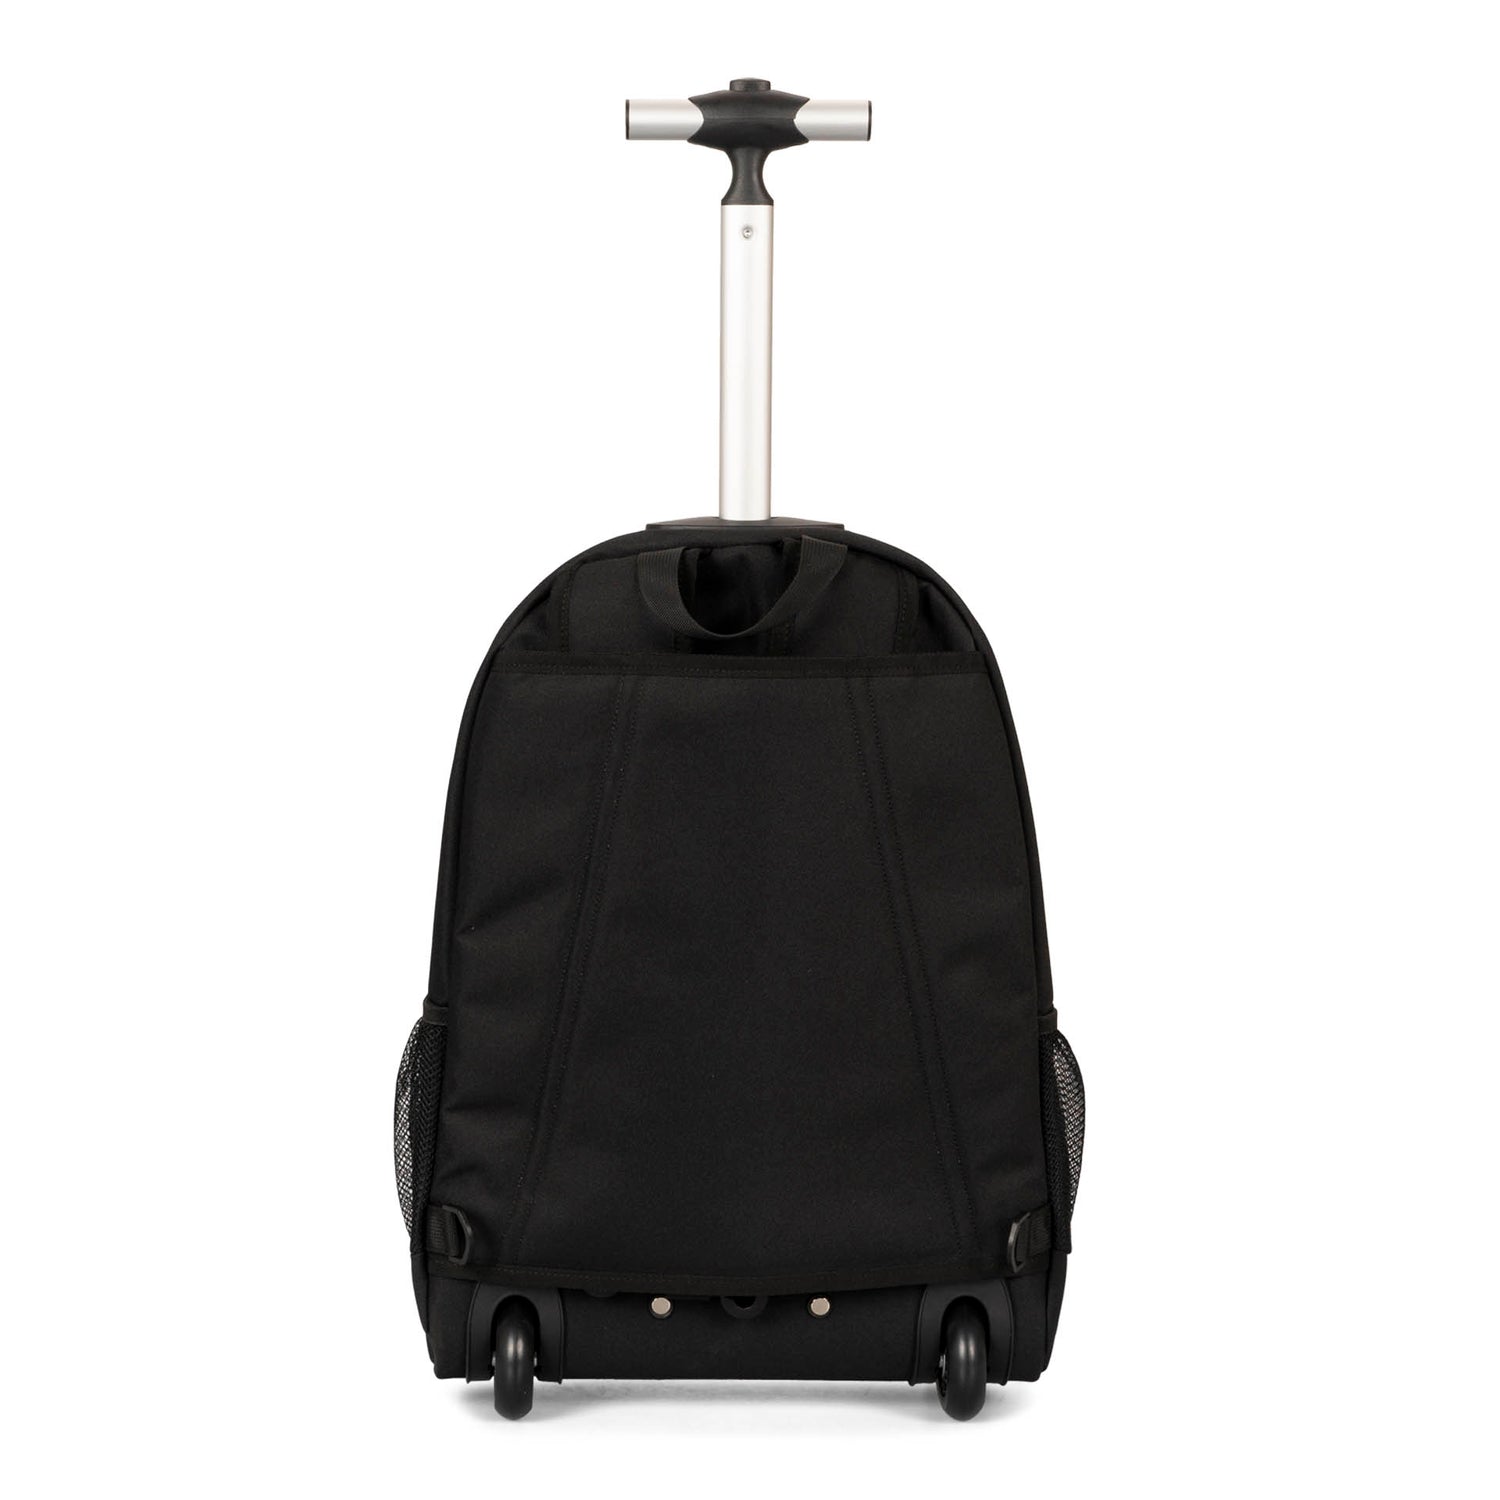 Back side of a black backpack on wheels called Mercier 3.0 designed by Tracker showing its telescopic handle, two wheels, and two side pockets.